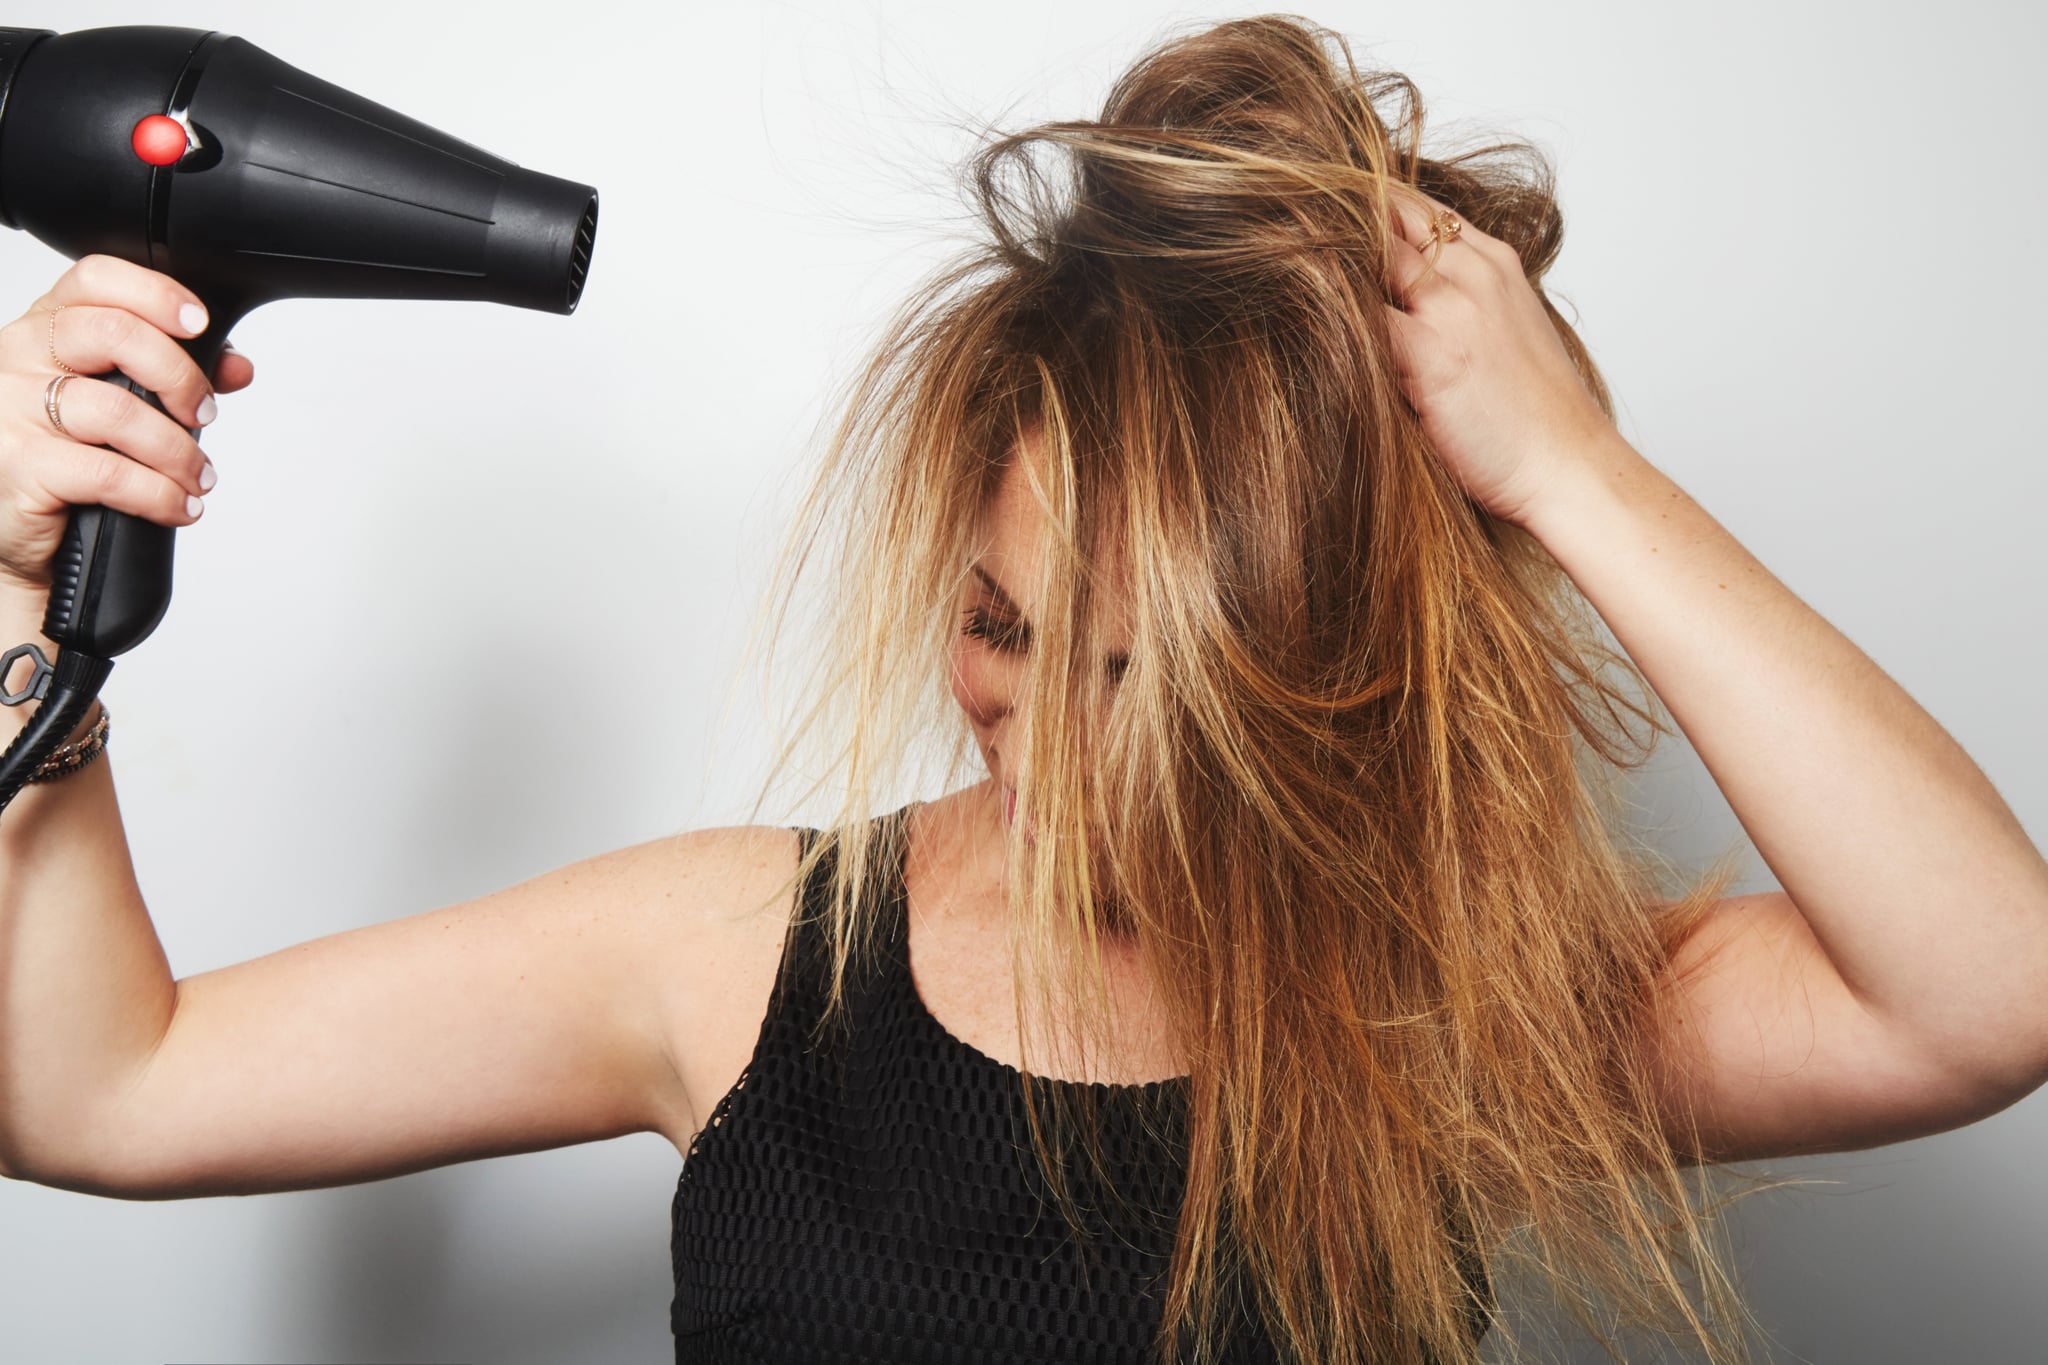 How to Clean Your Hair Dryer | POPSUGAR Smart Living